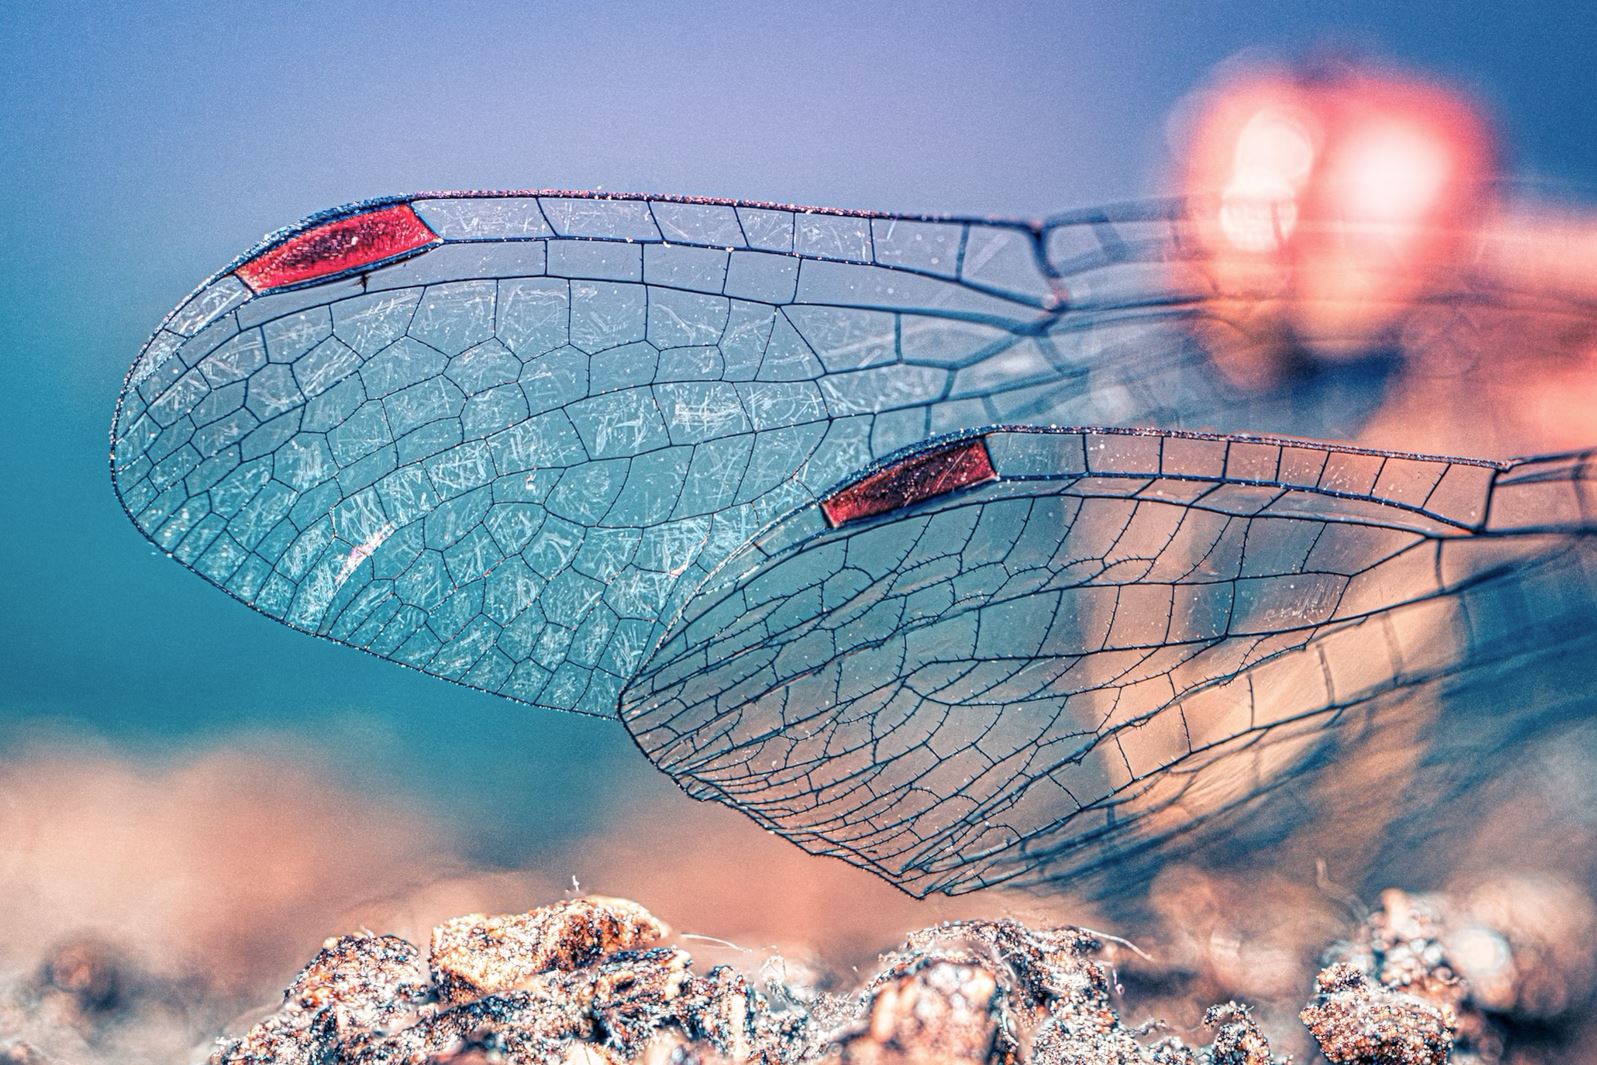 Shapes and colours found in nature. Close-up on a dragonfly's wings. Photo by Megs Harrison. Photo in public domain.